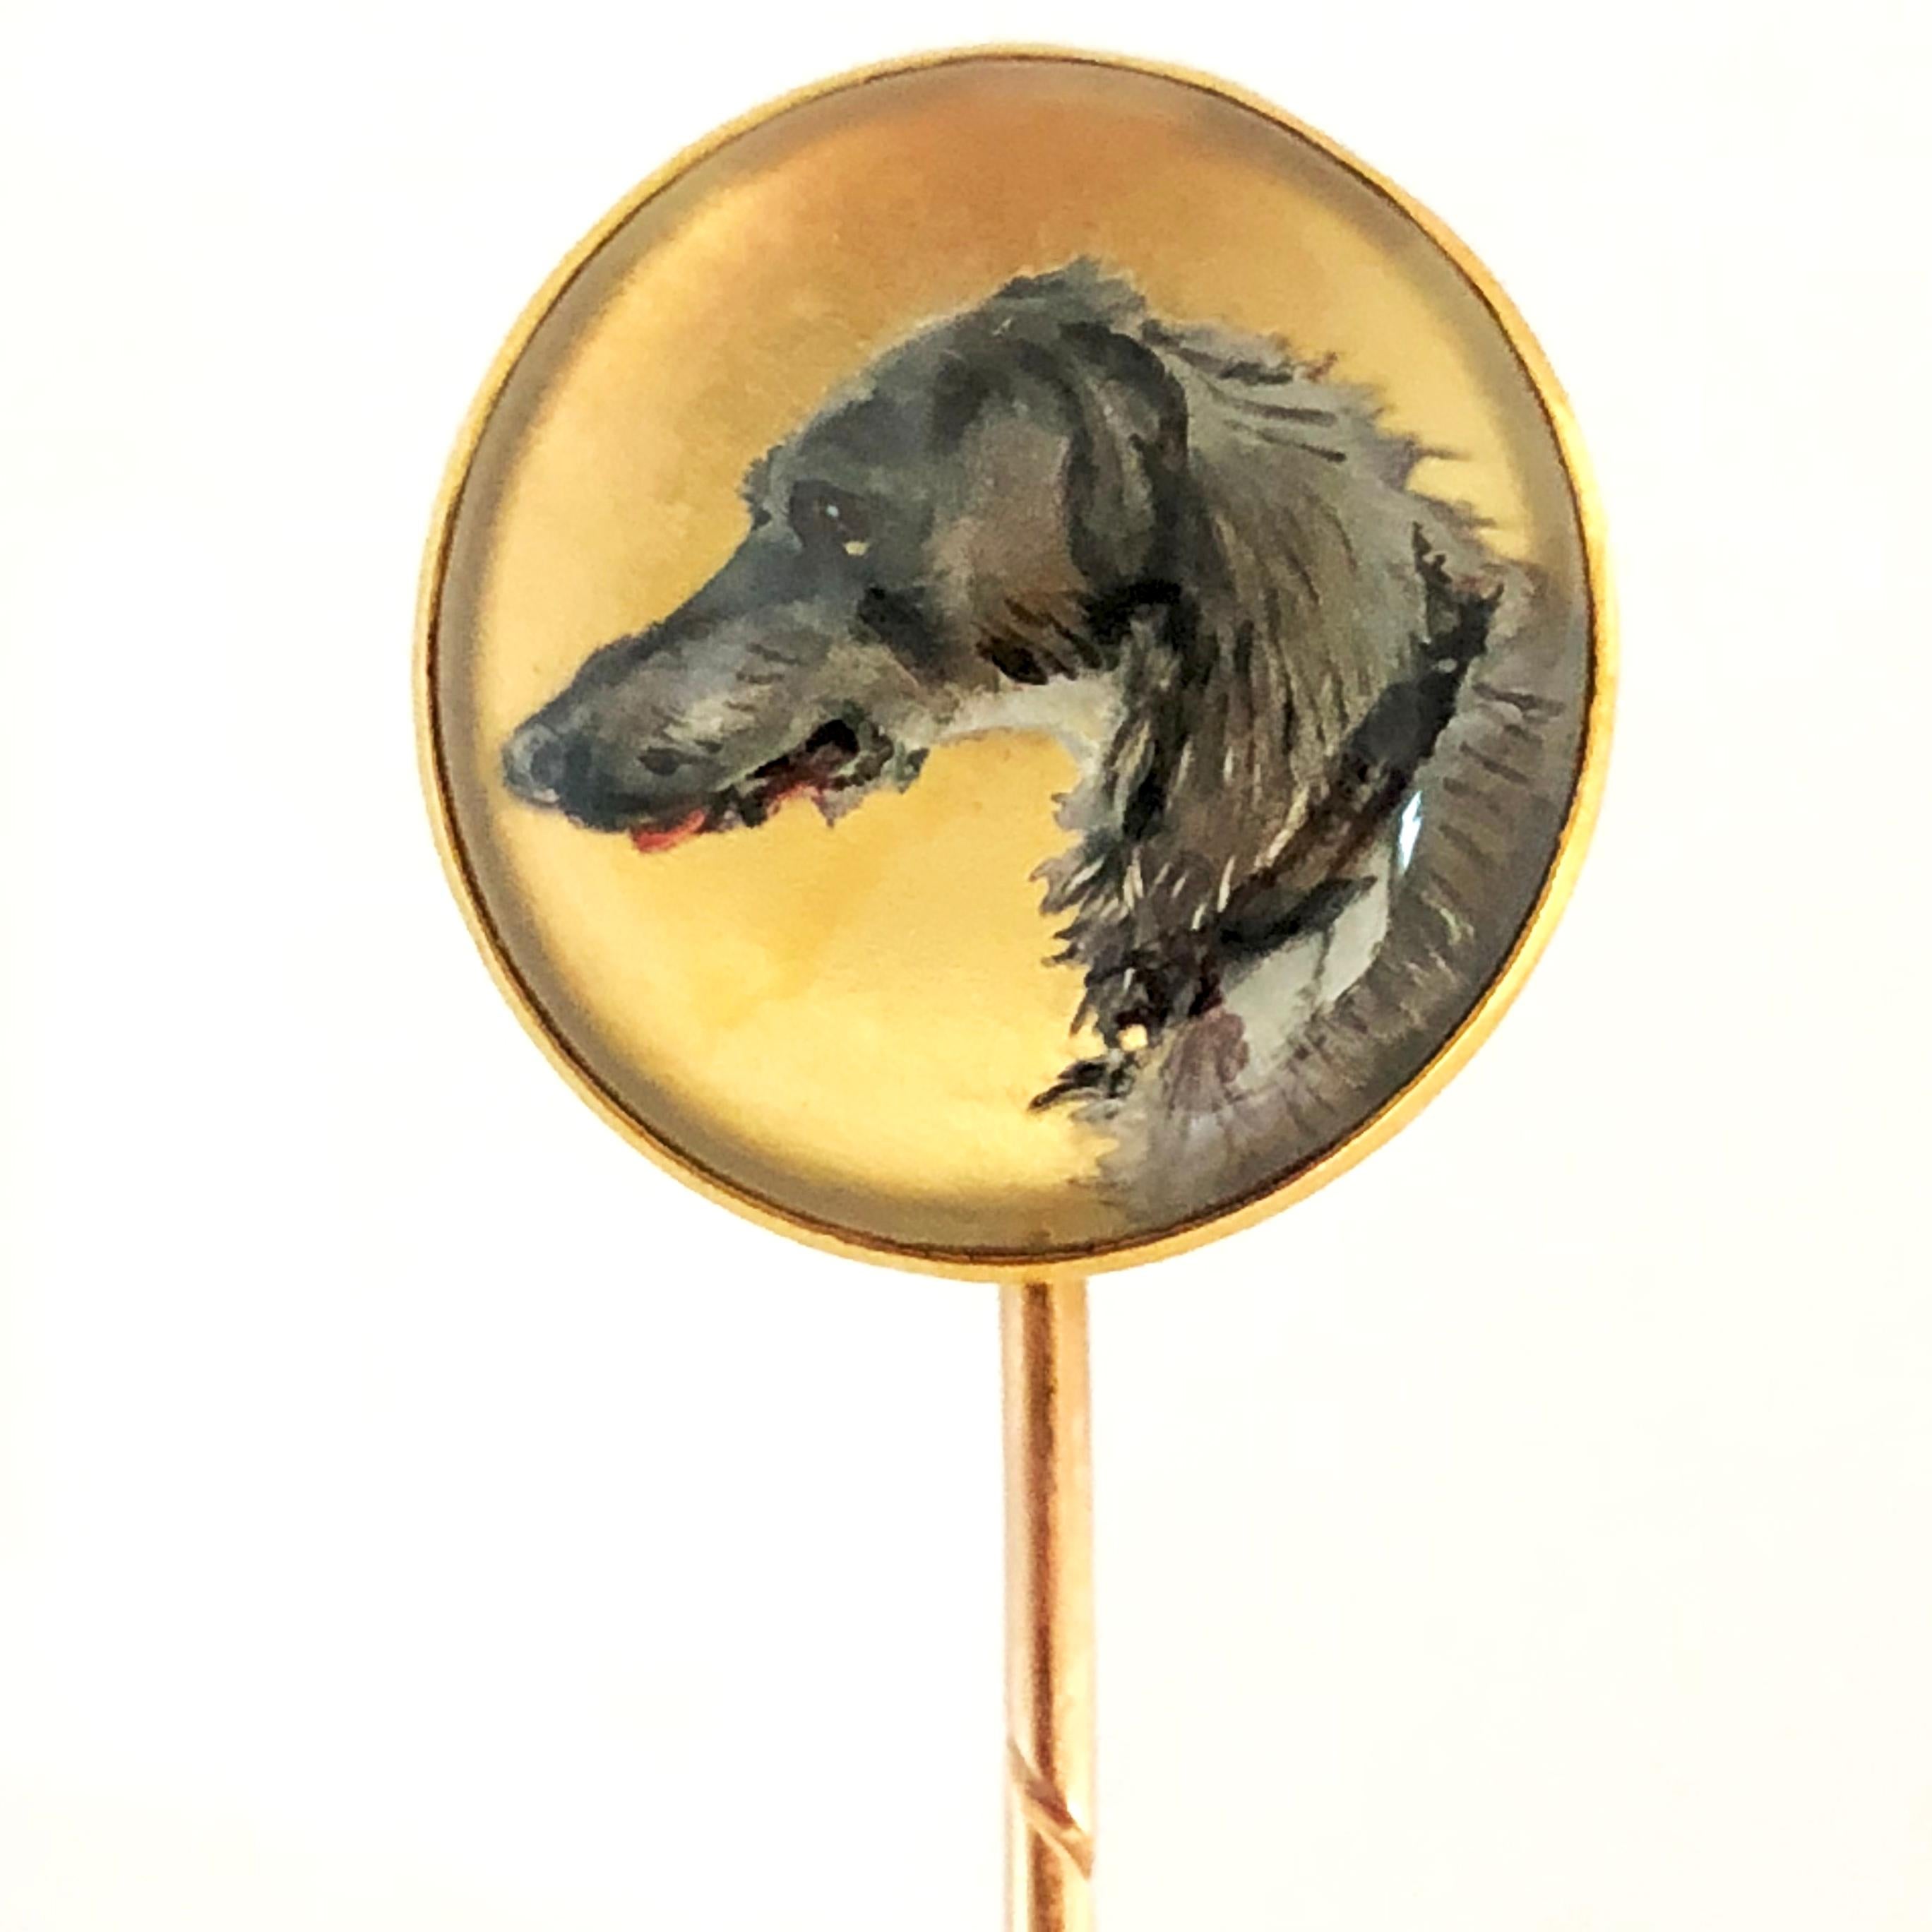 A fine reverse Essex crystal tie pin depicting a dog, early 20th Century. The tie pin has rubbed makers marks.